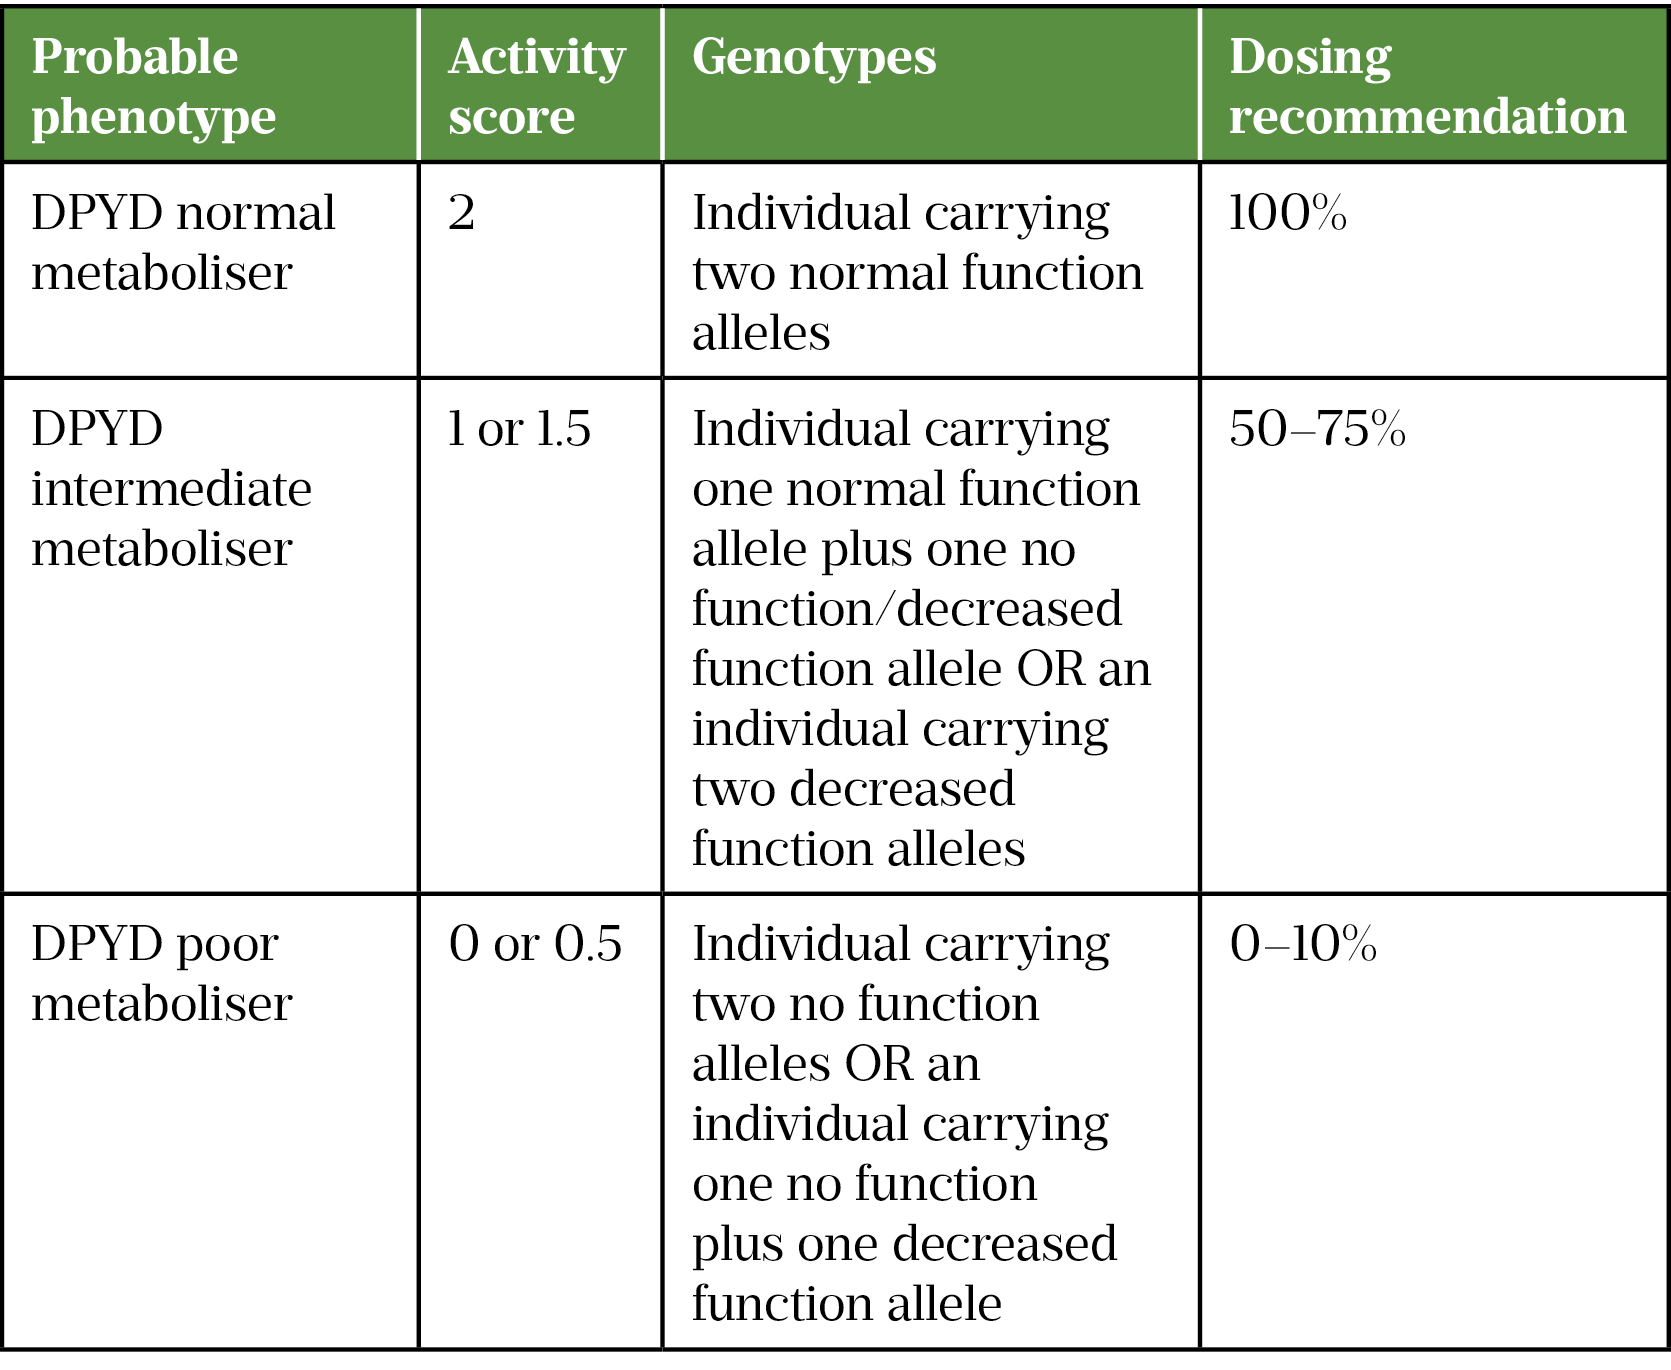 Table 2: Dosing recommendations according to DPYD test results